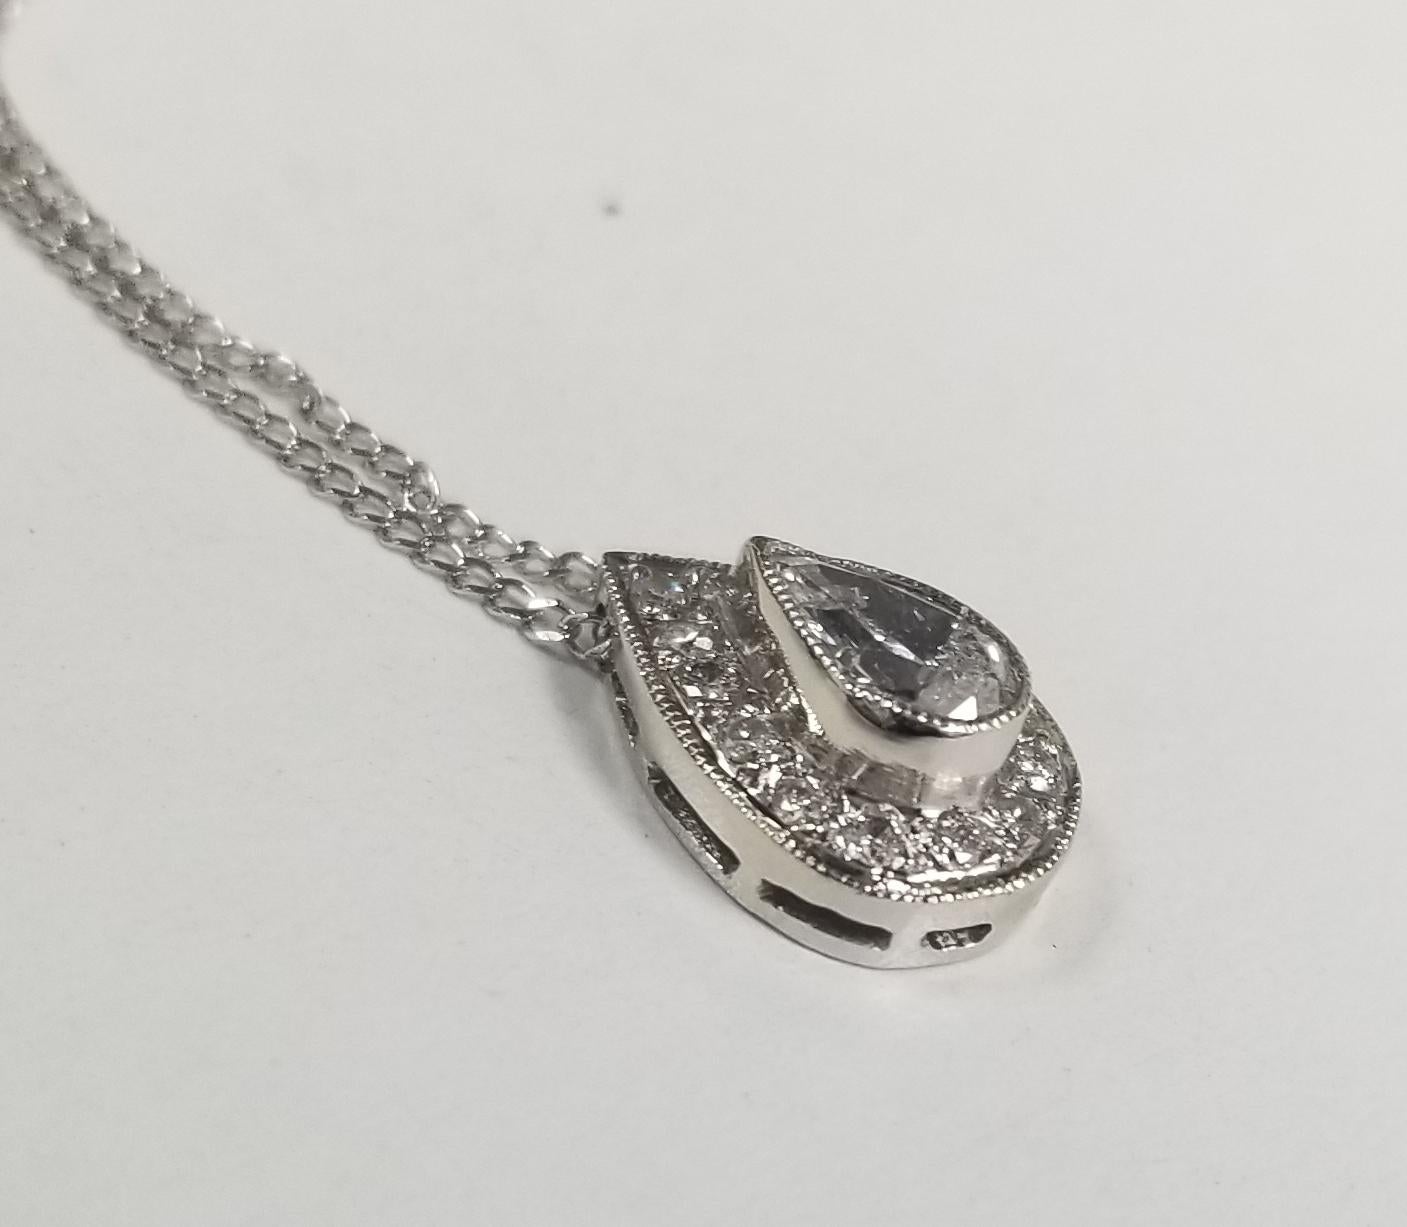 Specifications:
    PENDANT LENGTH: 1/2 inches
    CHAIN length:16 inch
    CHAIN & PENDANT weight: 2.6 gram
    STONES:  1 PEAR SHAPE   DIAMOND .35PTS.
    STONES: 14 ROUND DIAMONDS .21PTS.
    COLOR & CLARITY:   F-G, VS2-SI2
    metal:14k WHITE